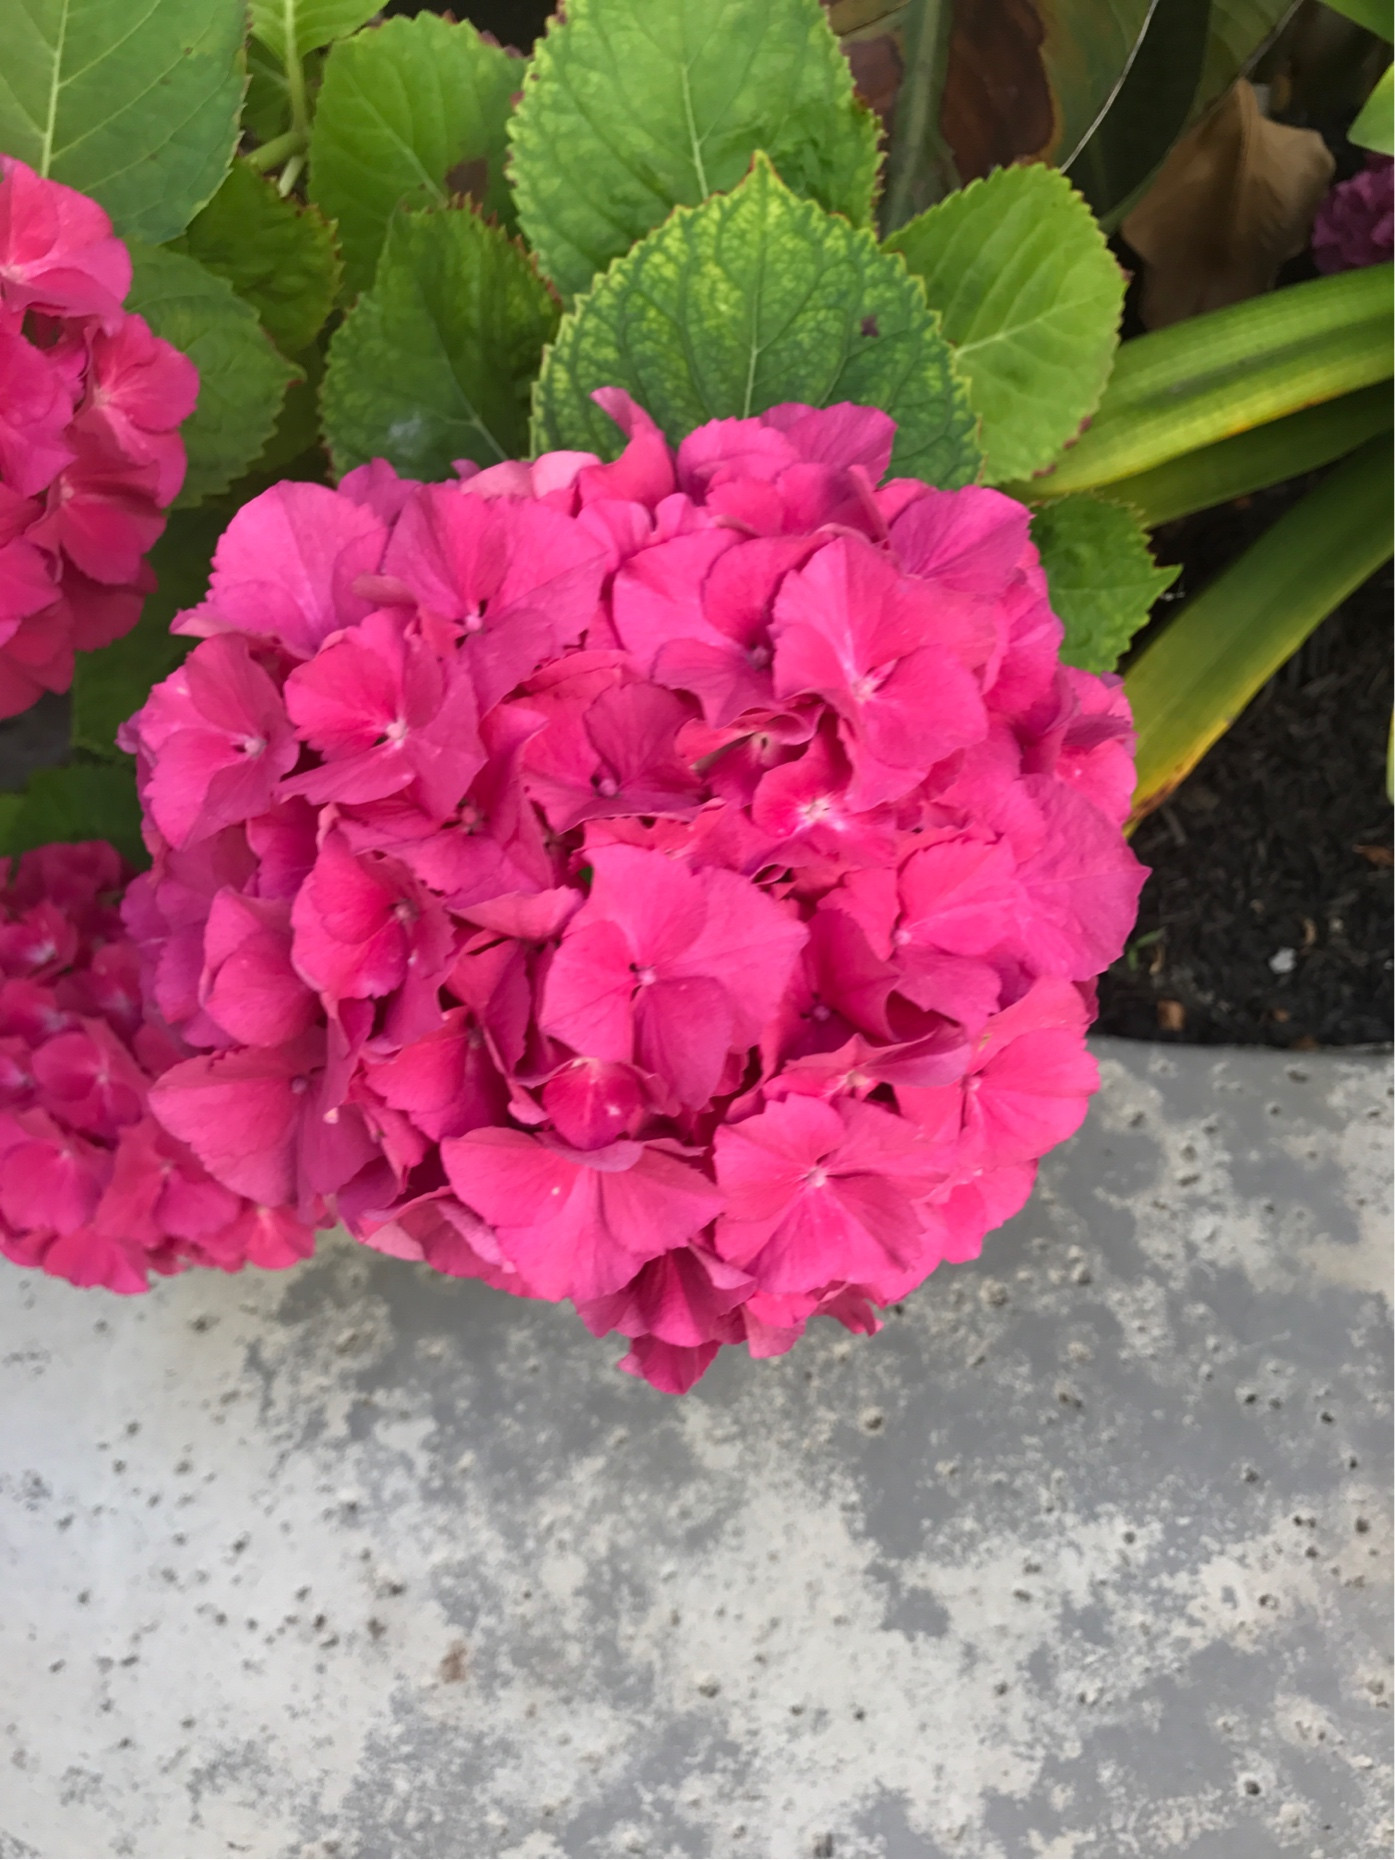 Hydrangea flowers not blooming as expected - Gardening & Landscaping ...